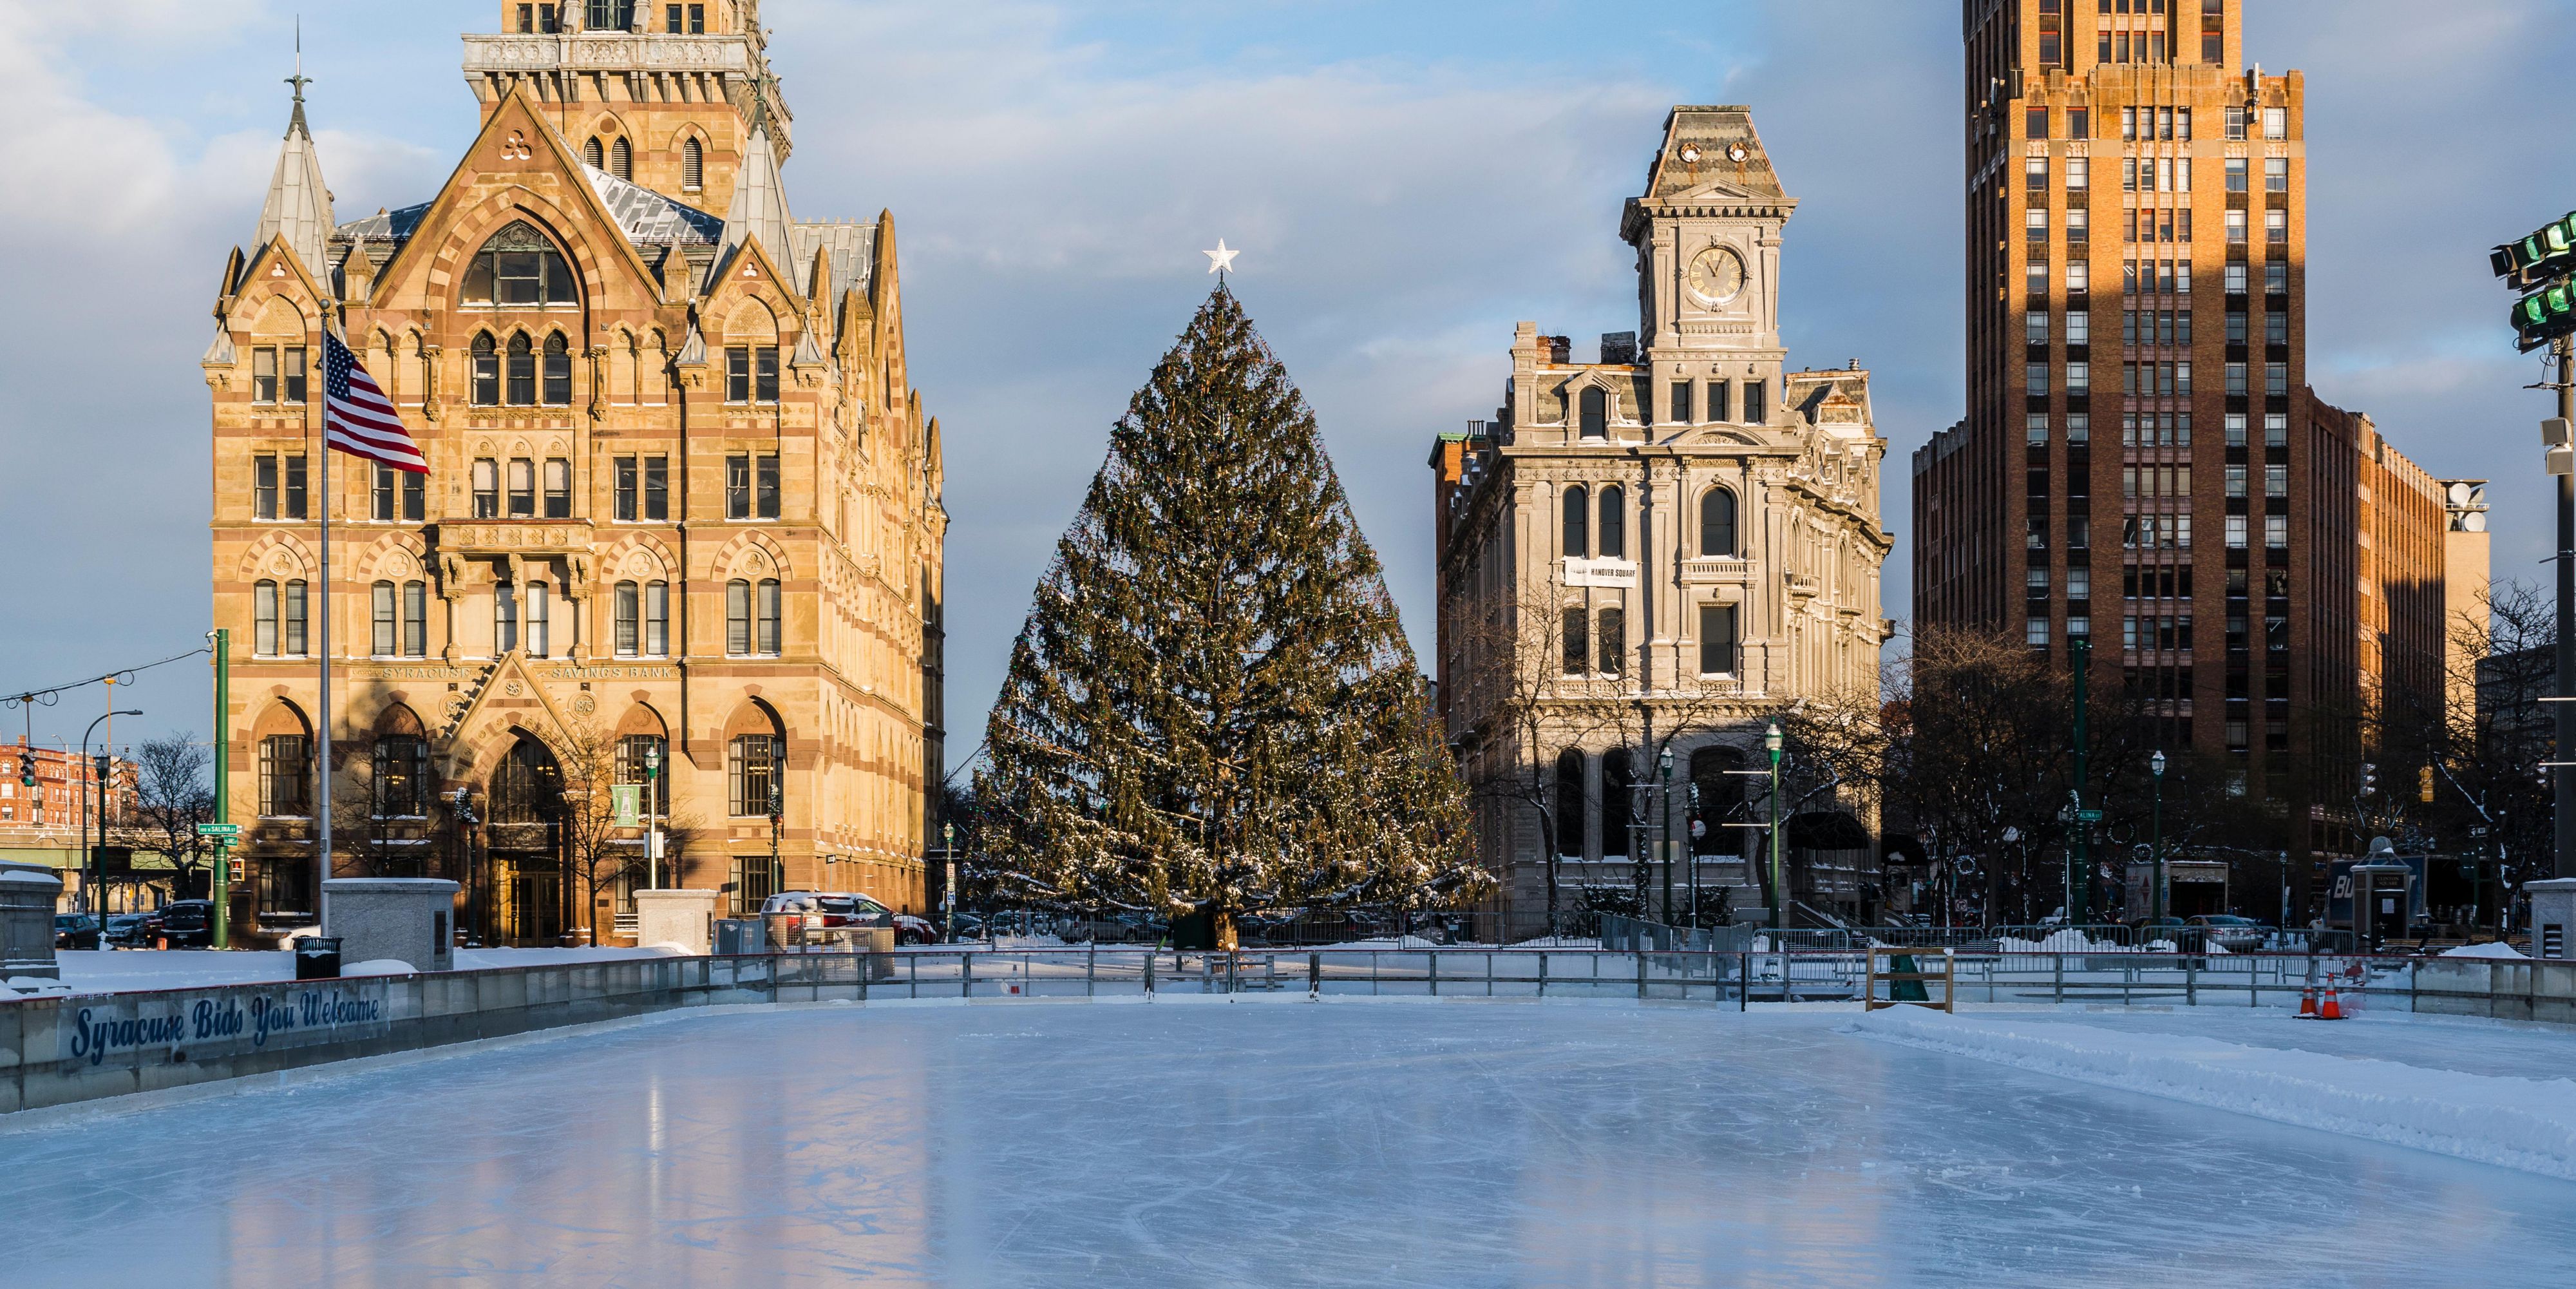 Plan your winter travel now to experience Syracuse in all her glory. Whether exploring the snowy winter days or staying cozy indoors, we are in the center of it all at the Holiday Inn Express & Suites Dewitt (Syracuse). Enjoy a game or show at SRC Arena or the JMA Wireless Done. Take in the Everson Museum of Art or shop and dine at Destiny USA.